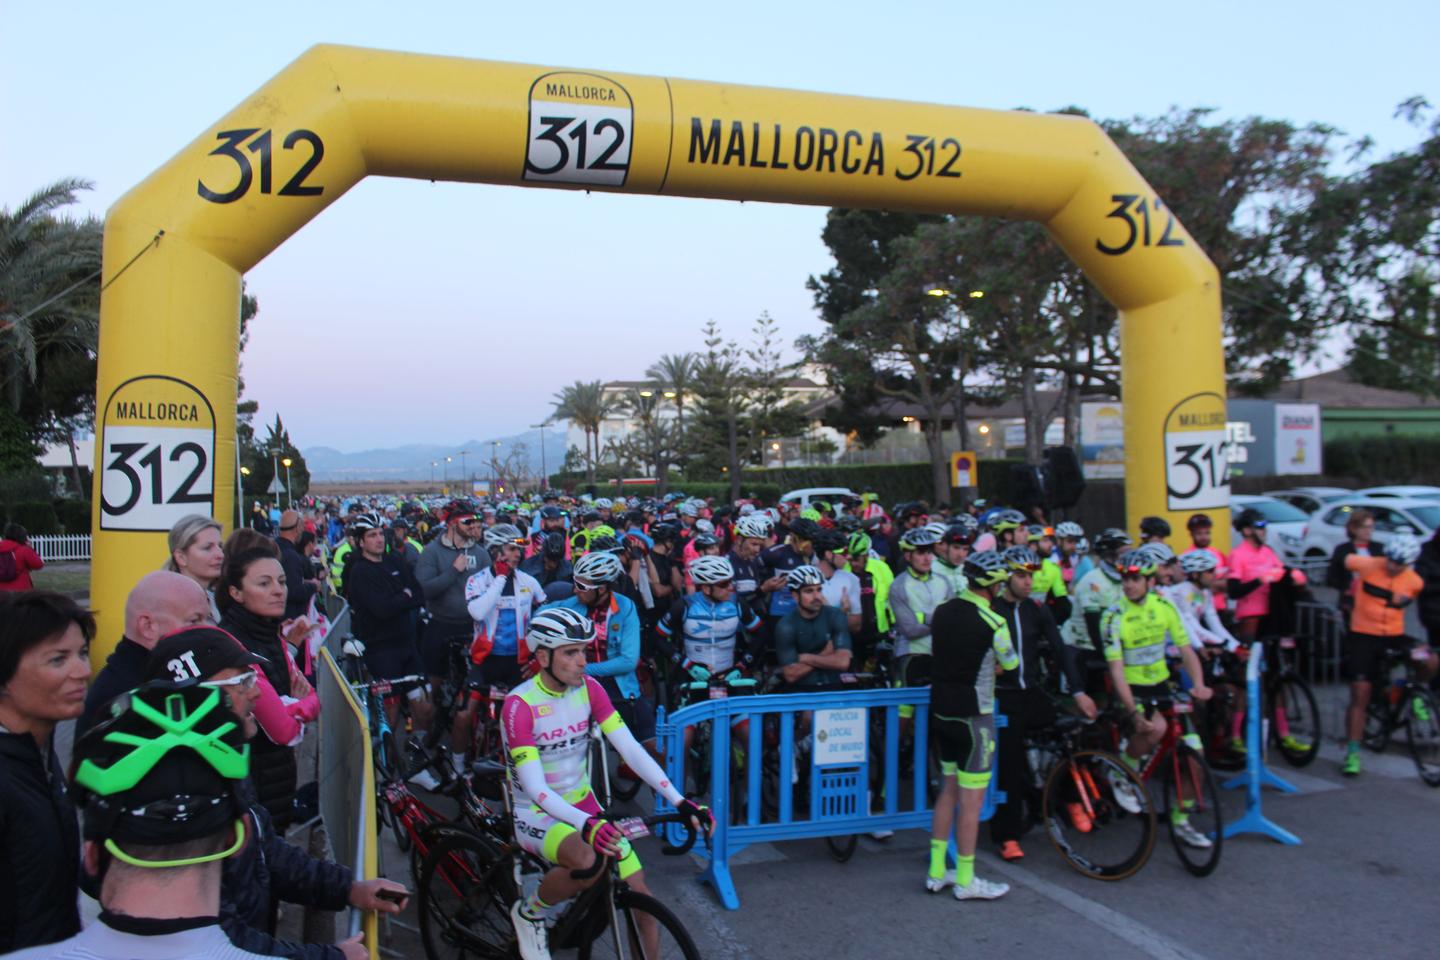 Cyclists gather at the start line of the Mallorca 312 event under the iconic yellow arch.